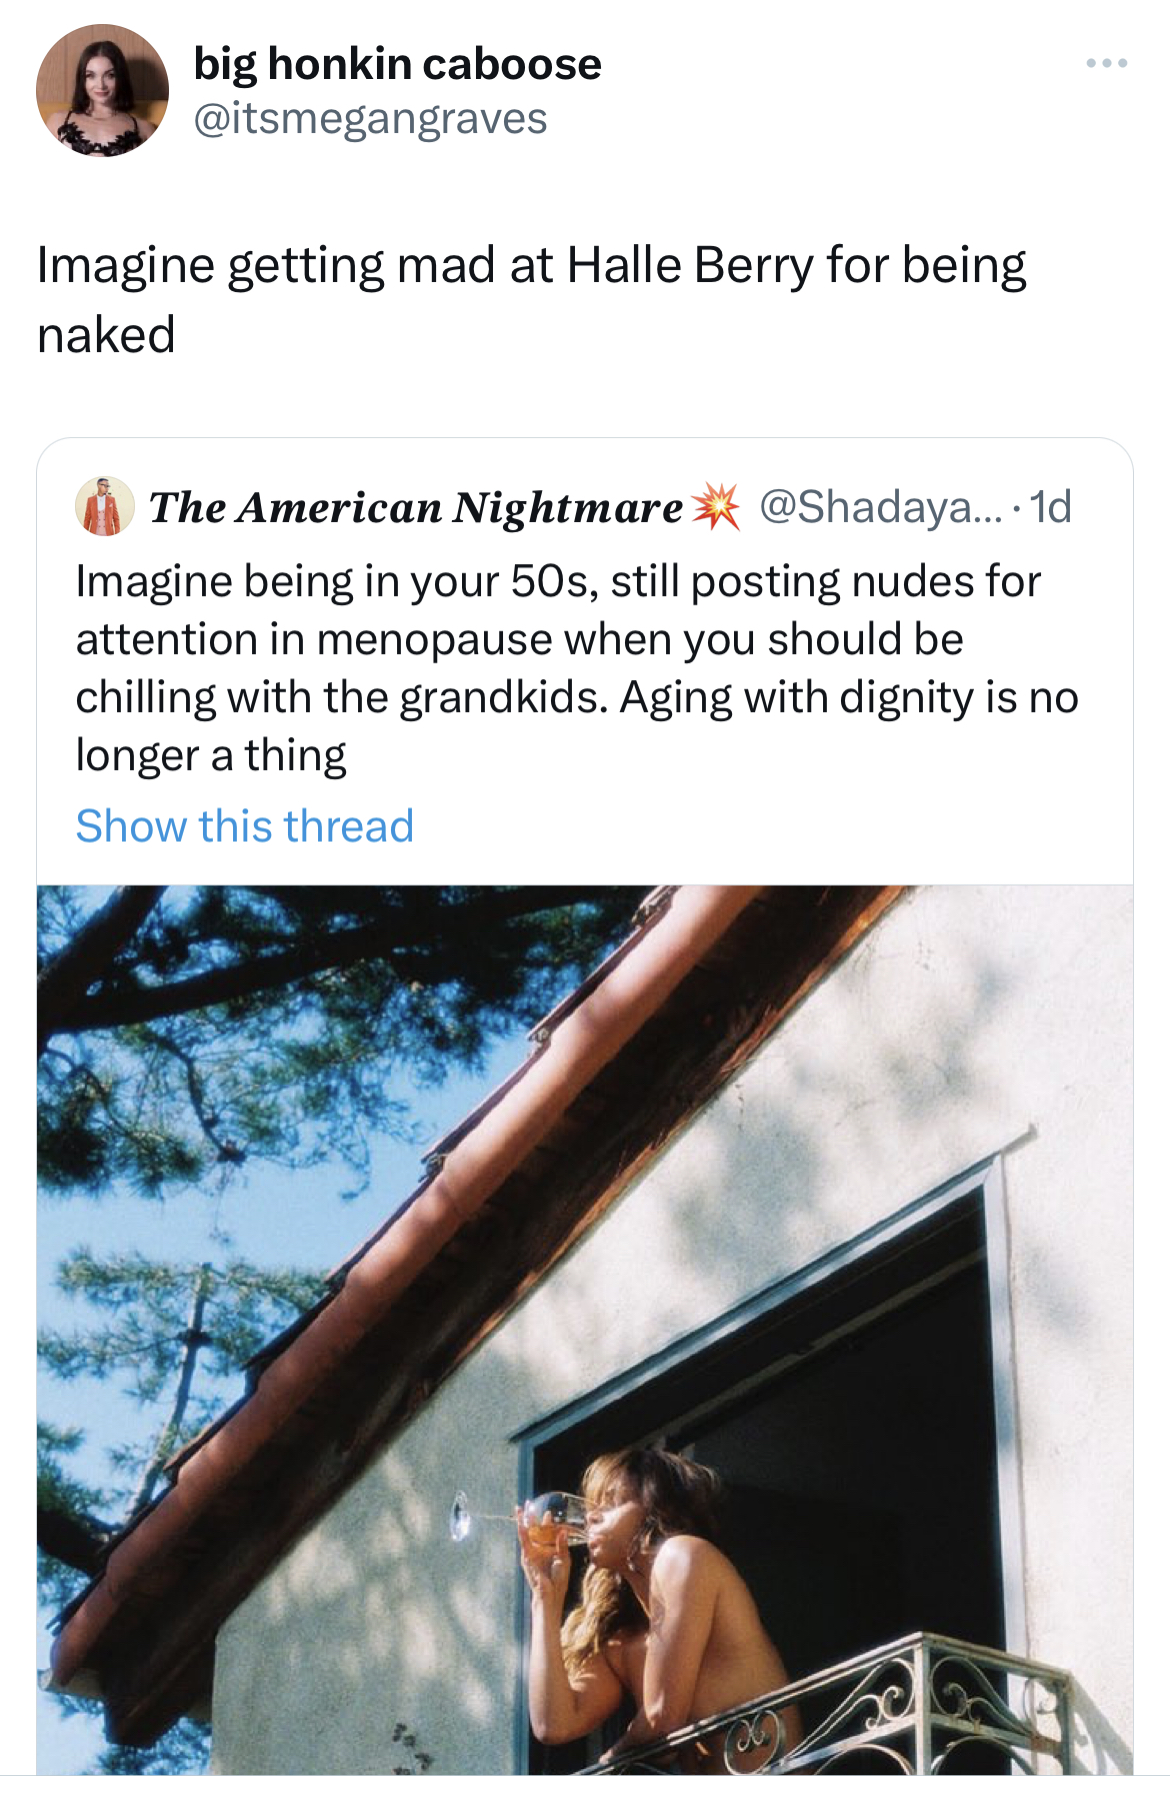 savage tweets - website - G big honkin caboose Imagine getting mad at Halle Berry for being naked The American Nightmare ... 1d Imagine being in your 50s, still posting nudes for attention in menopause when you should be chilling with the grandkids. Aging